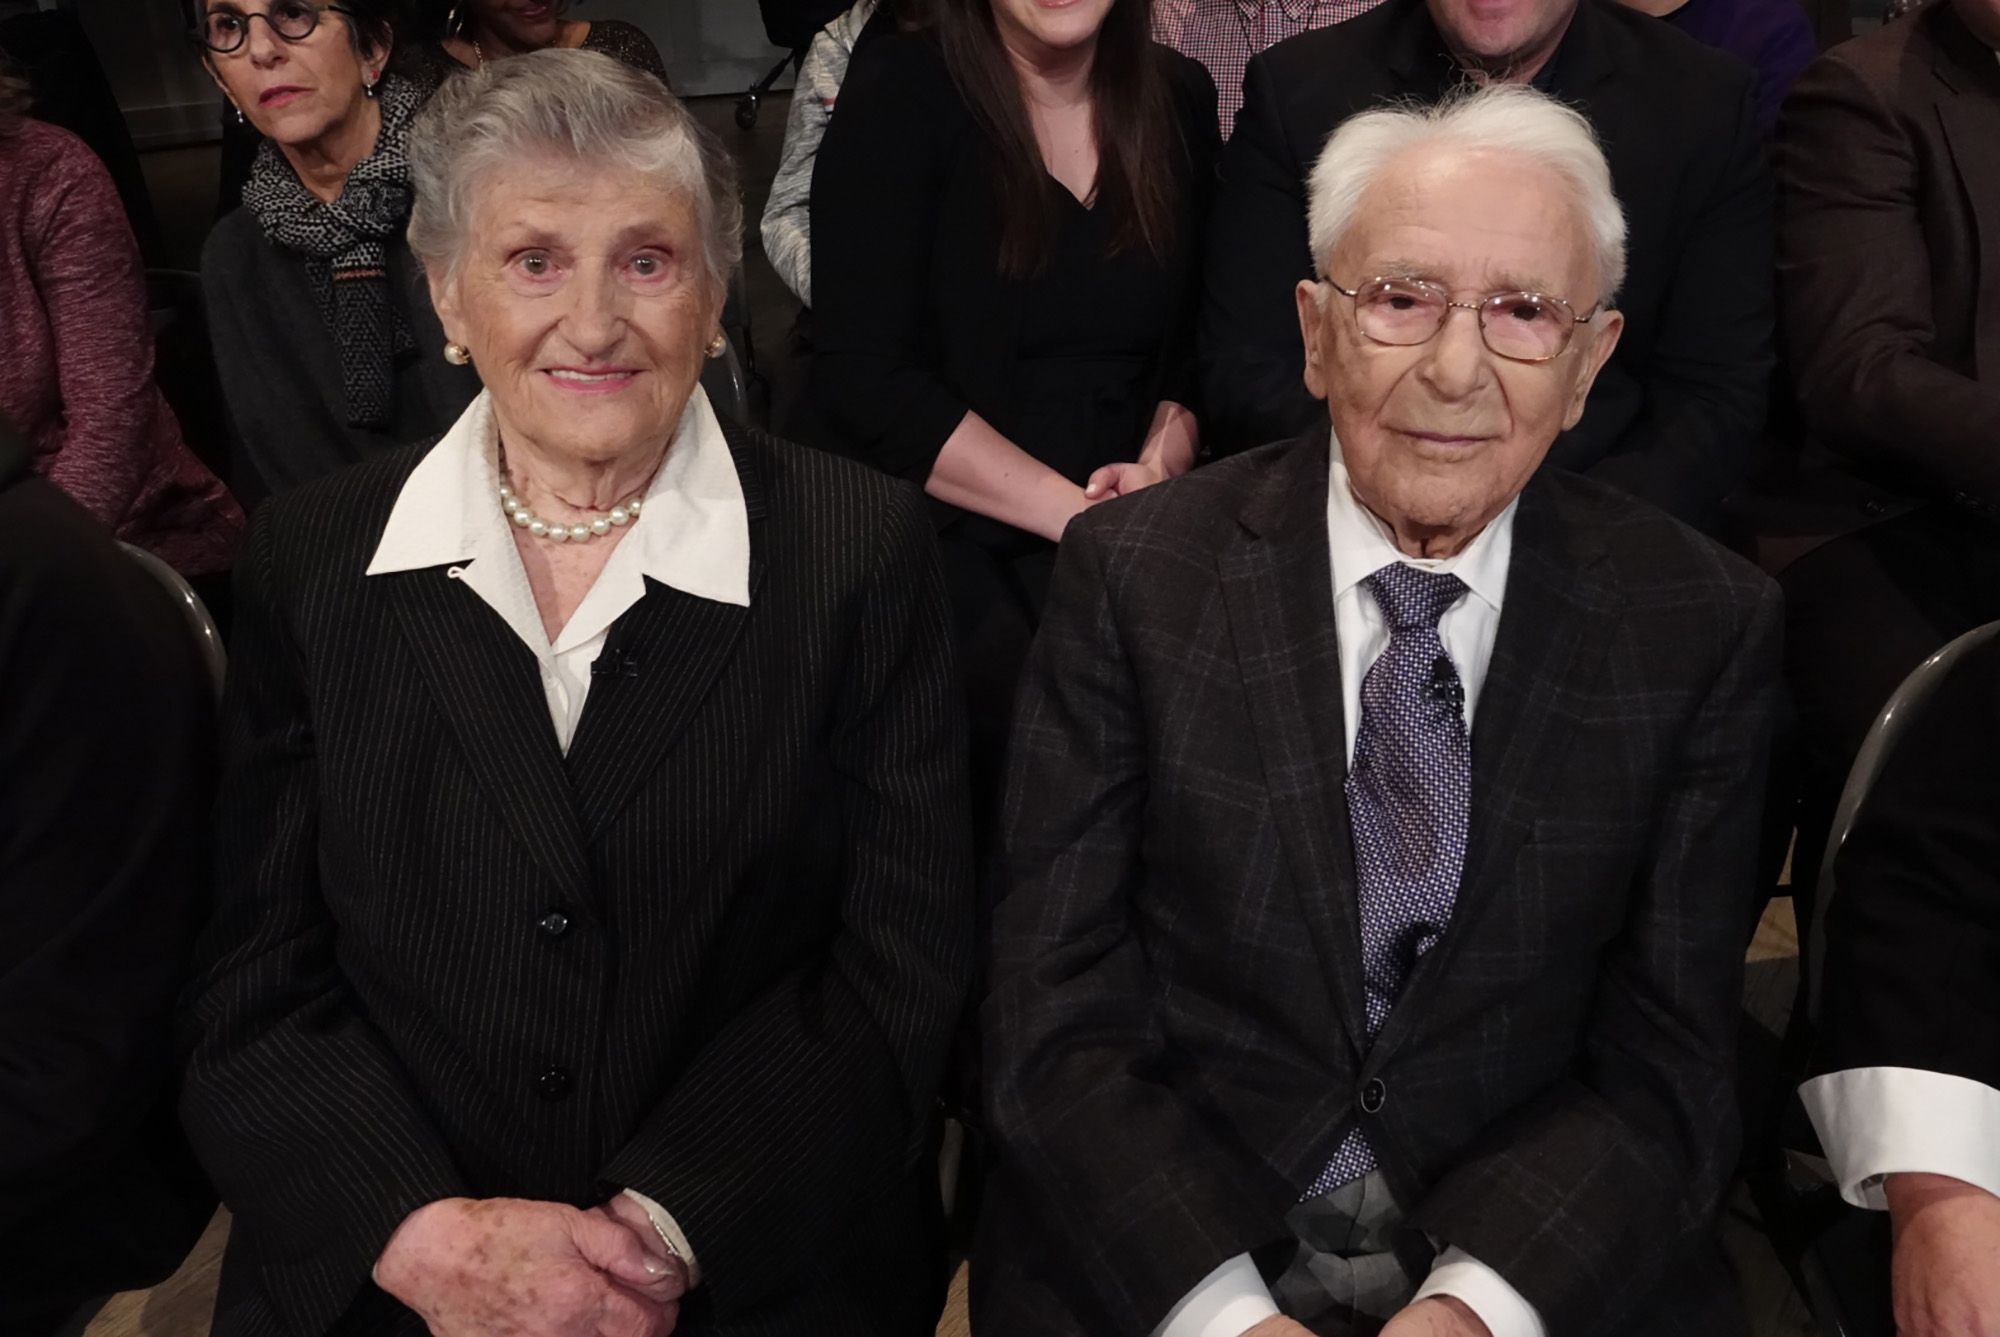 PHOTO: Mikhl Baran and Millie Baran remember falling in love after escaping concentration camps during the Holocaust on "The View," Jan. 27, 2020.